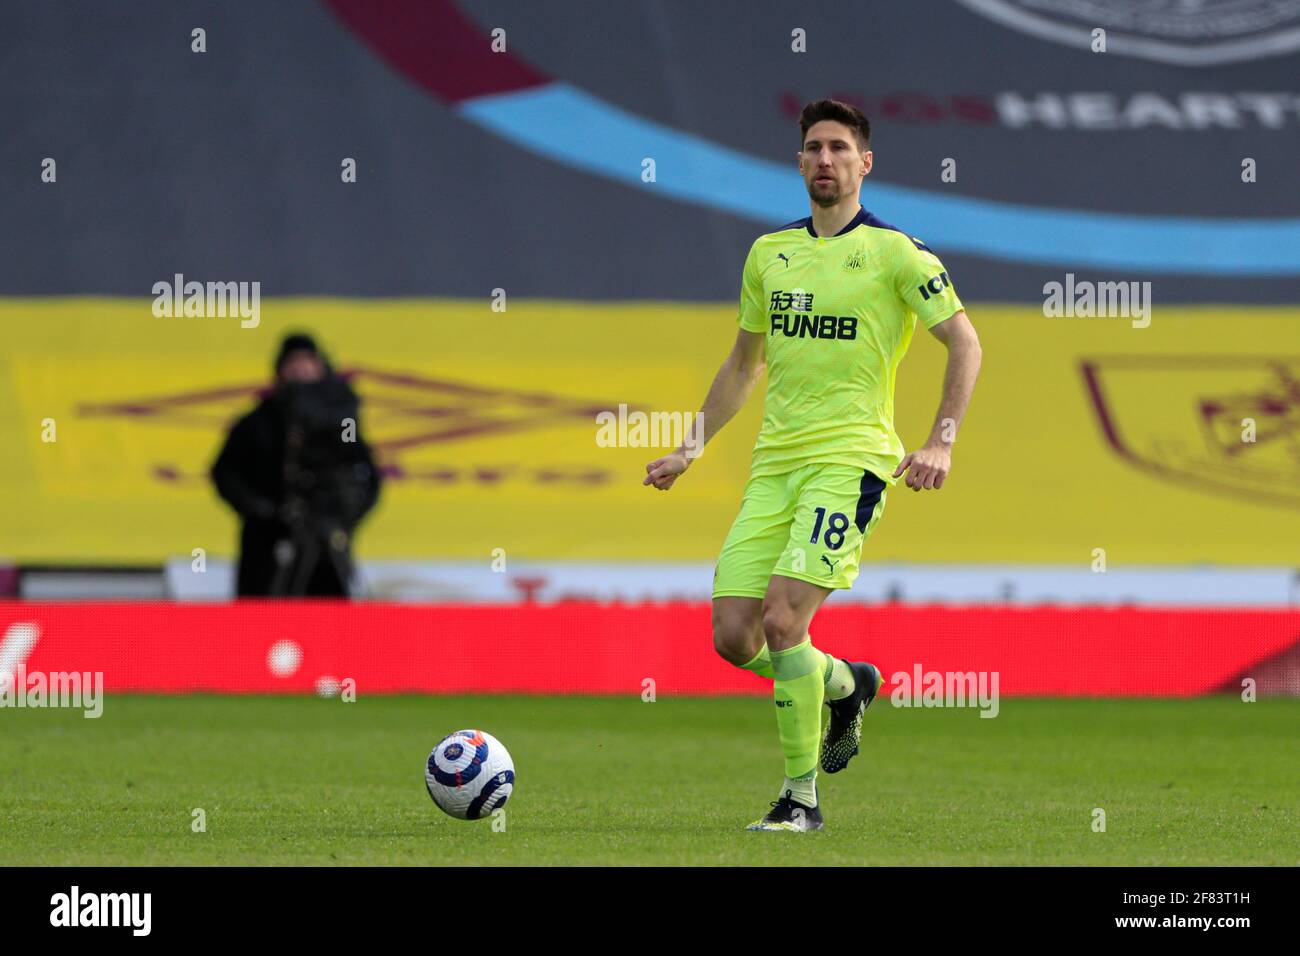 Burnley, UK. 10th Apr, 2021. Federico Fernandez #18 of Newcastle United in Burnley, UK on 4/10/2021. (Photo by Conor Molloy/News Images/Sipa USA) Credit: Sipa USA/Alamy Live News Stock Photo